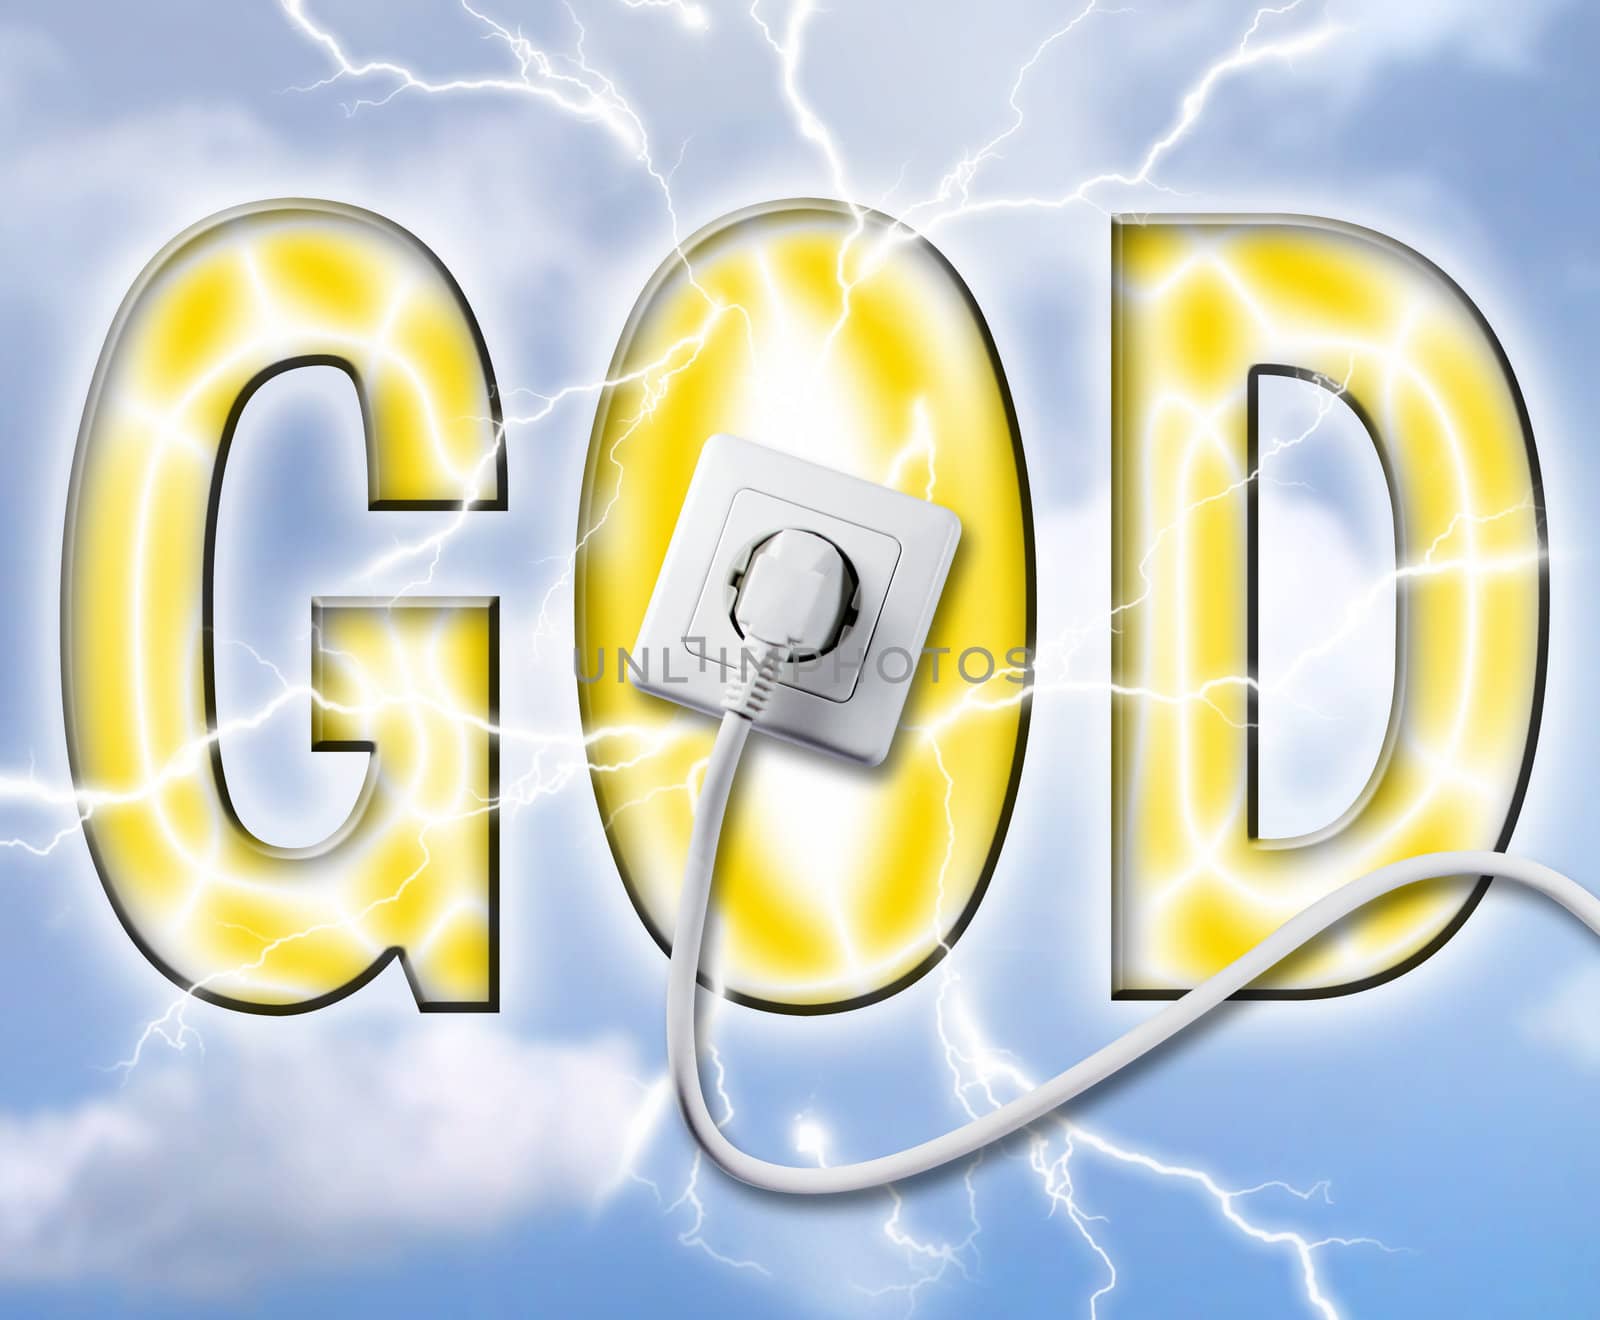 the power of god with white socket